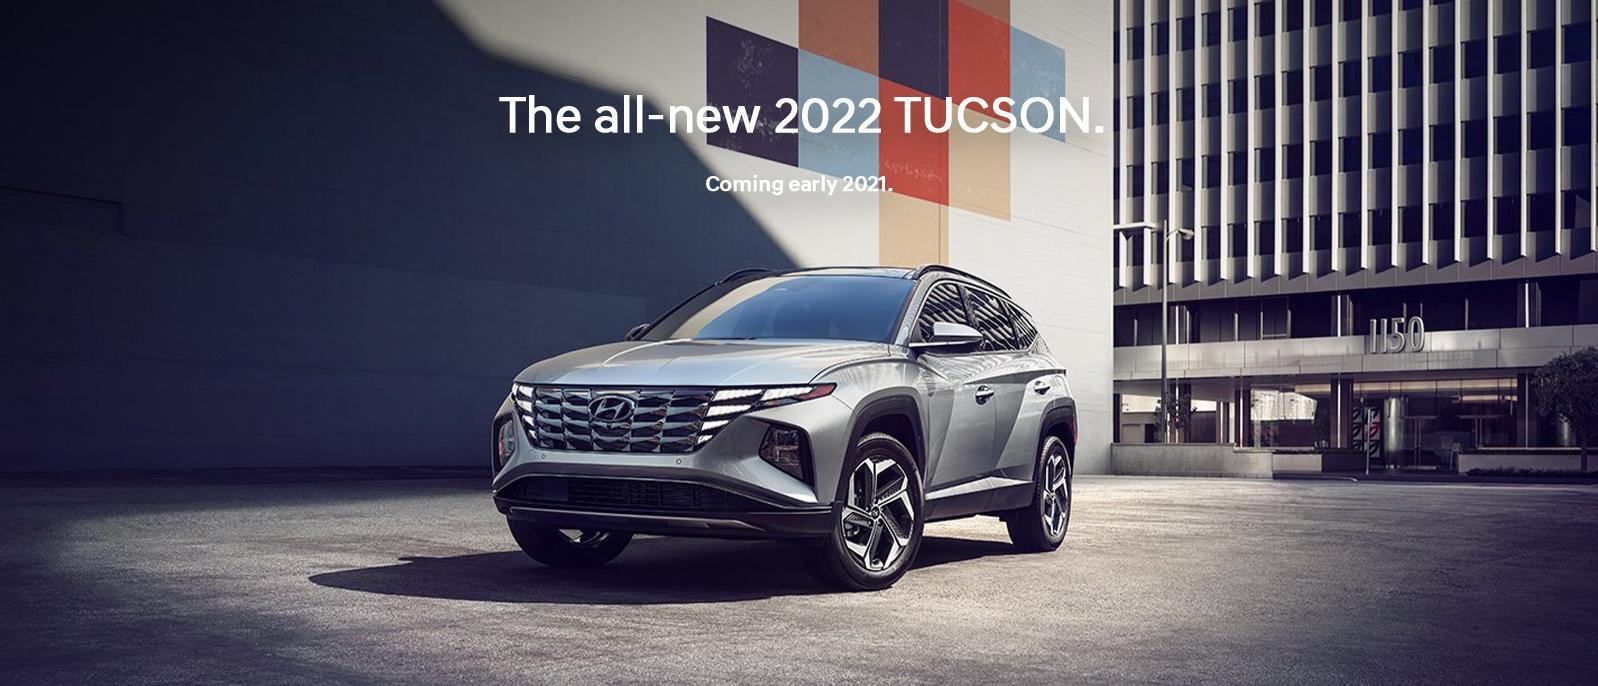  The-All-New-2022-Tucson